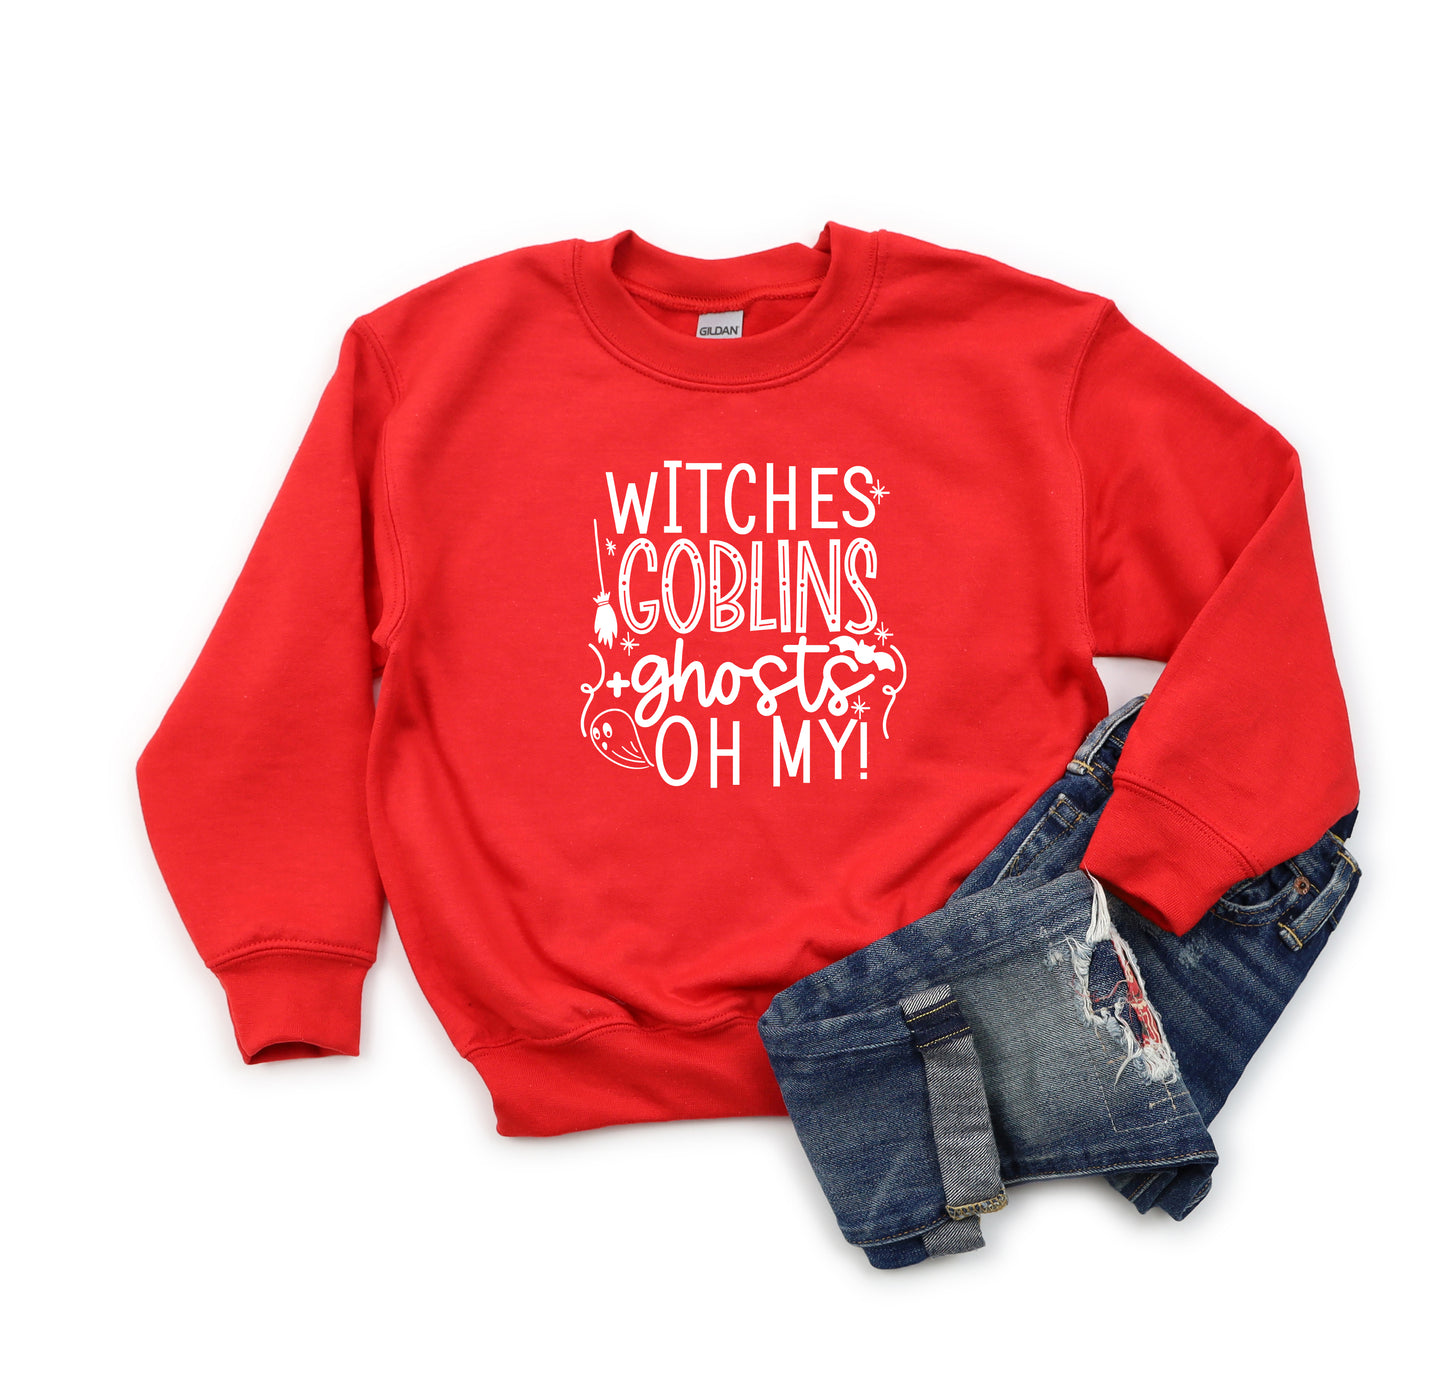 Witches Goblins Ghosts | Youth Sweatshirt